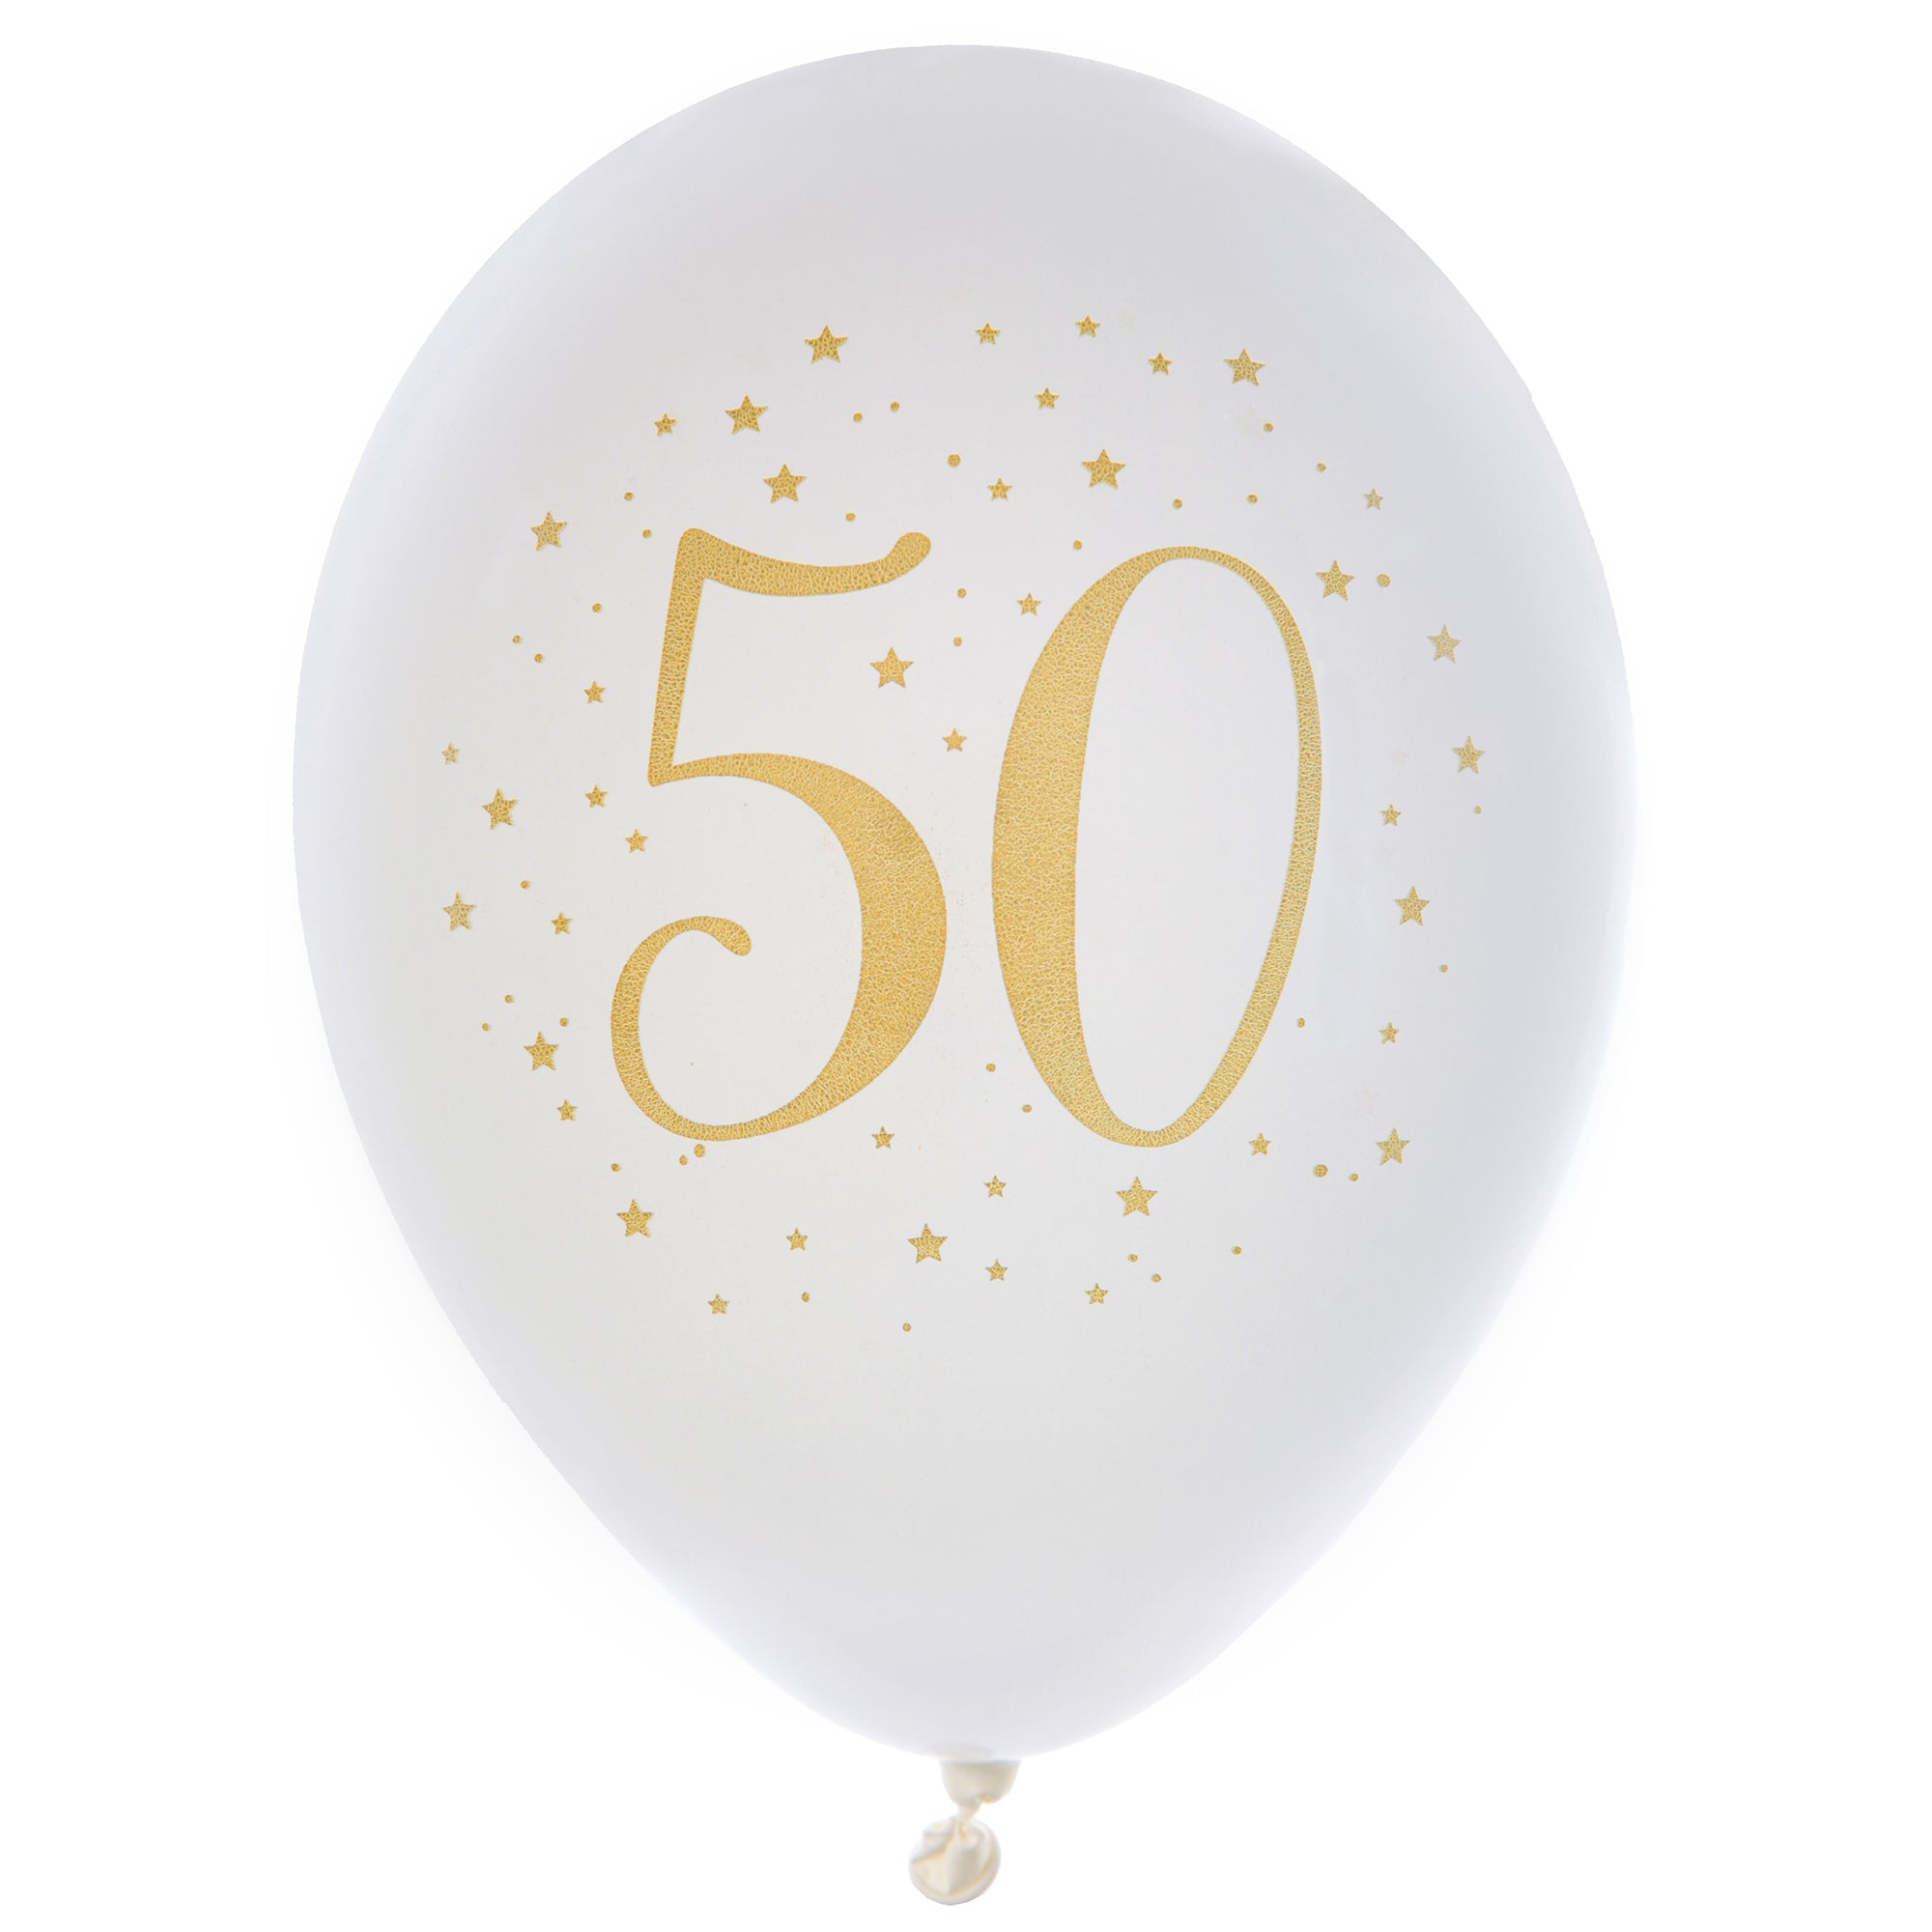 Age 50 8 Printed Latex Balloons White and Gold 9in